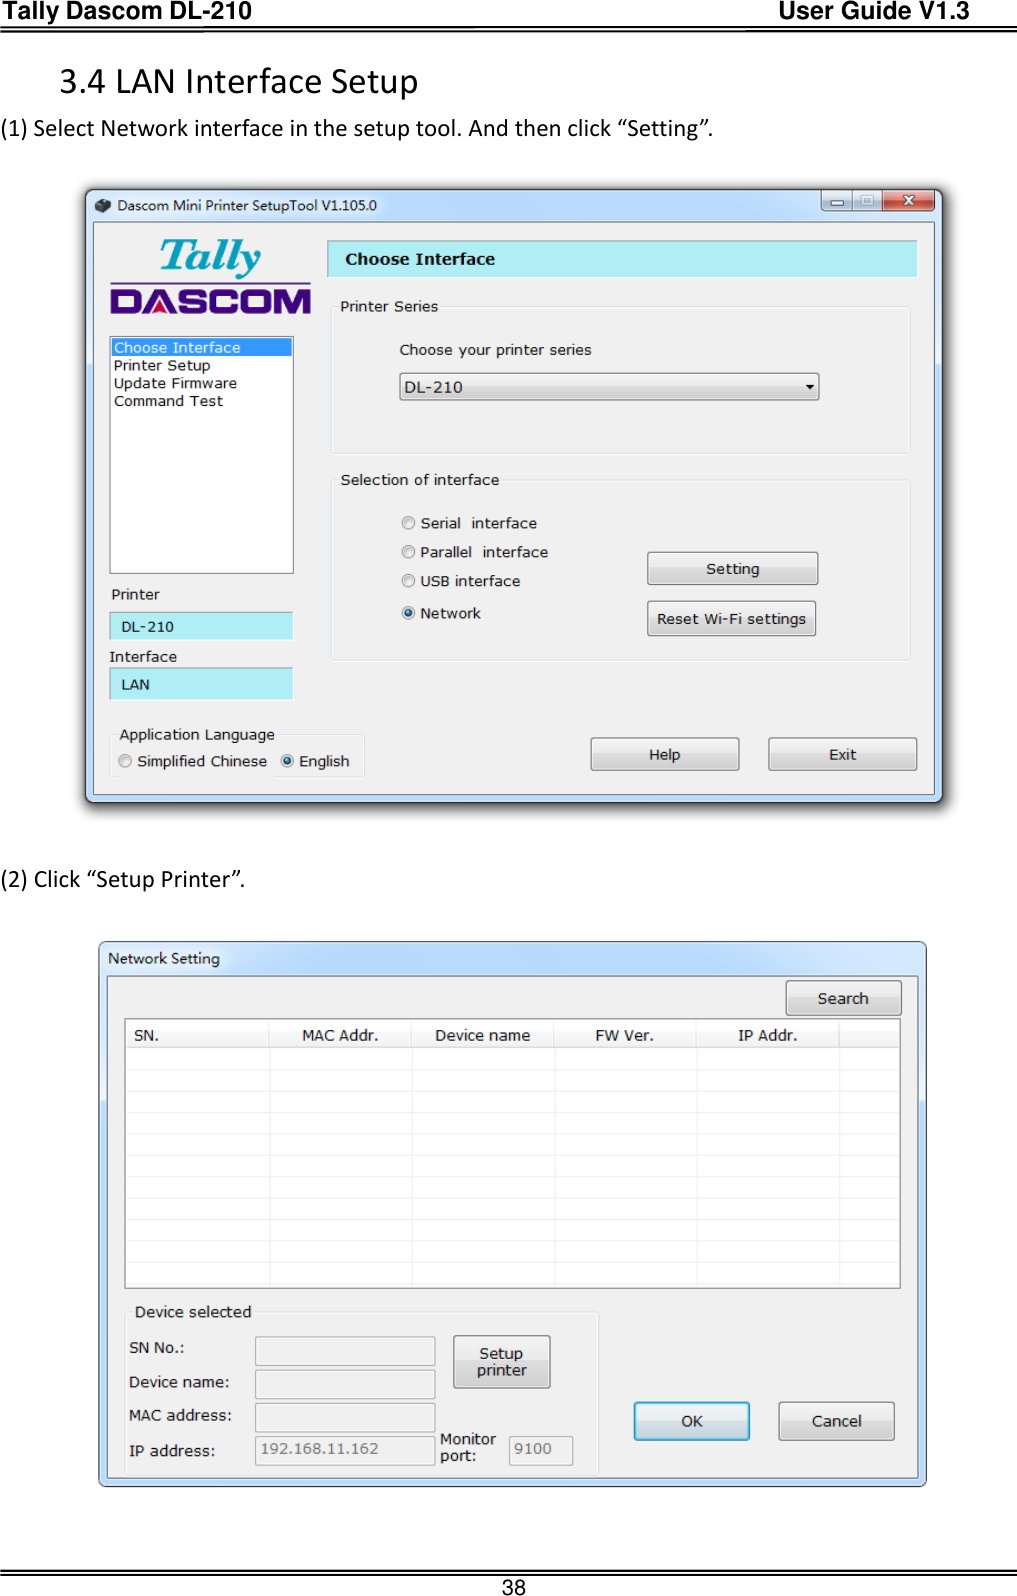 Tally Dascom DL-210                                          User Guide V1.3  38 3.4 LAN Interface Setup (1) Select Network interface in the setup tool. And then click “Setting”.  (2) Click “Setup Printer”.       